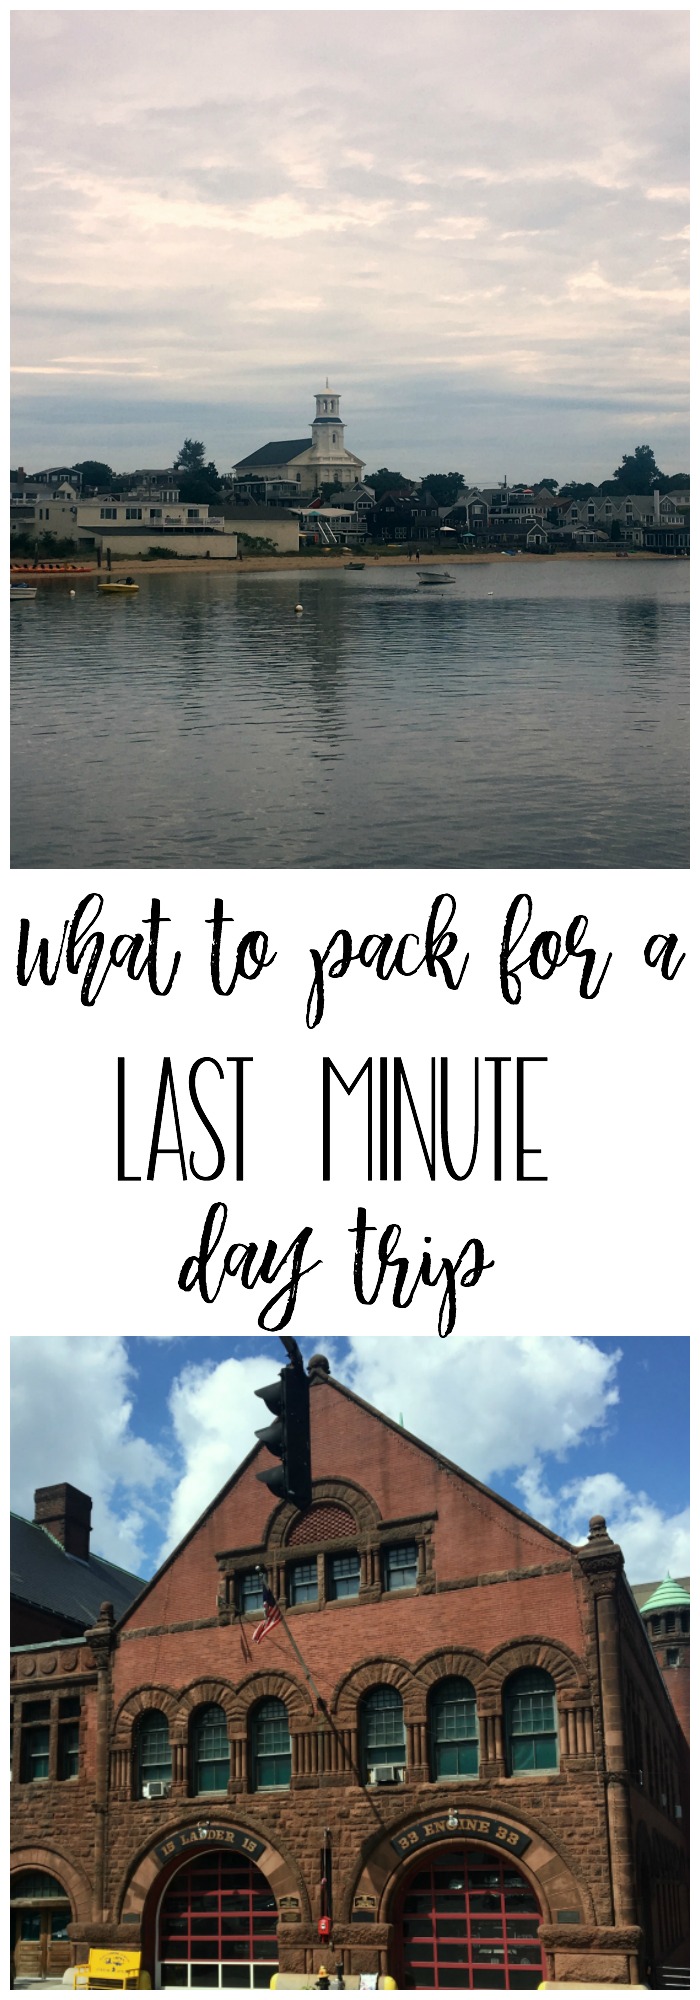 Planning a quick, last minute day trip getaway? Follow these easy tips for what to pack for a last minute day trip! #MyLittleWins 